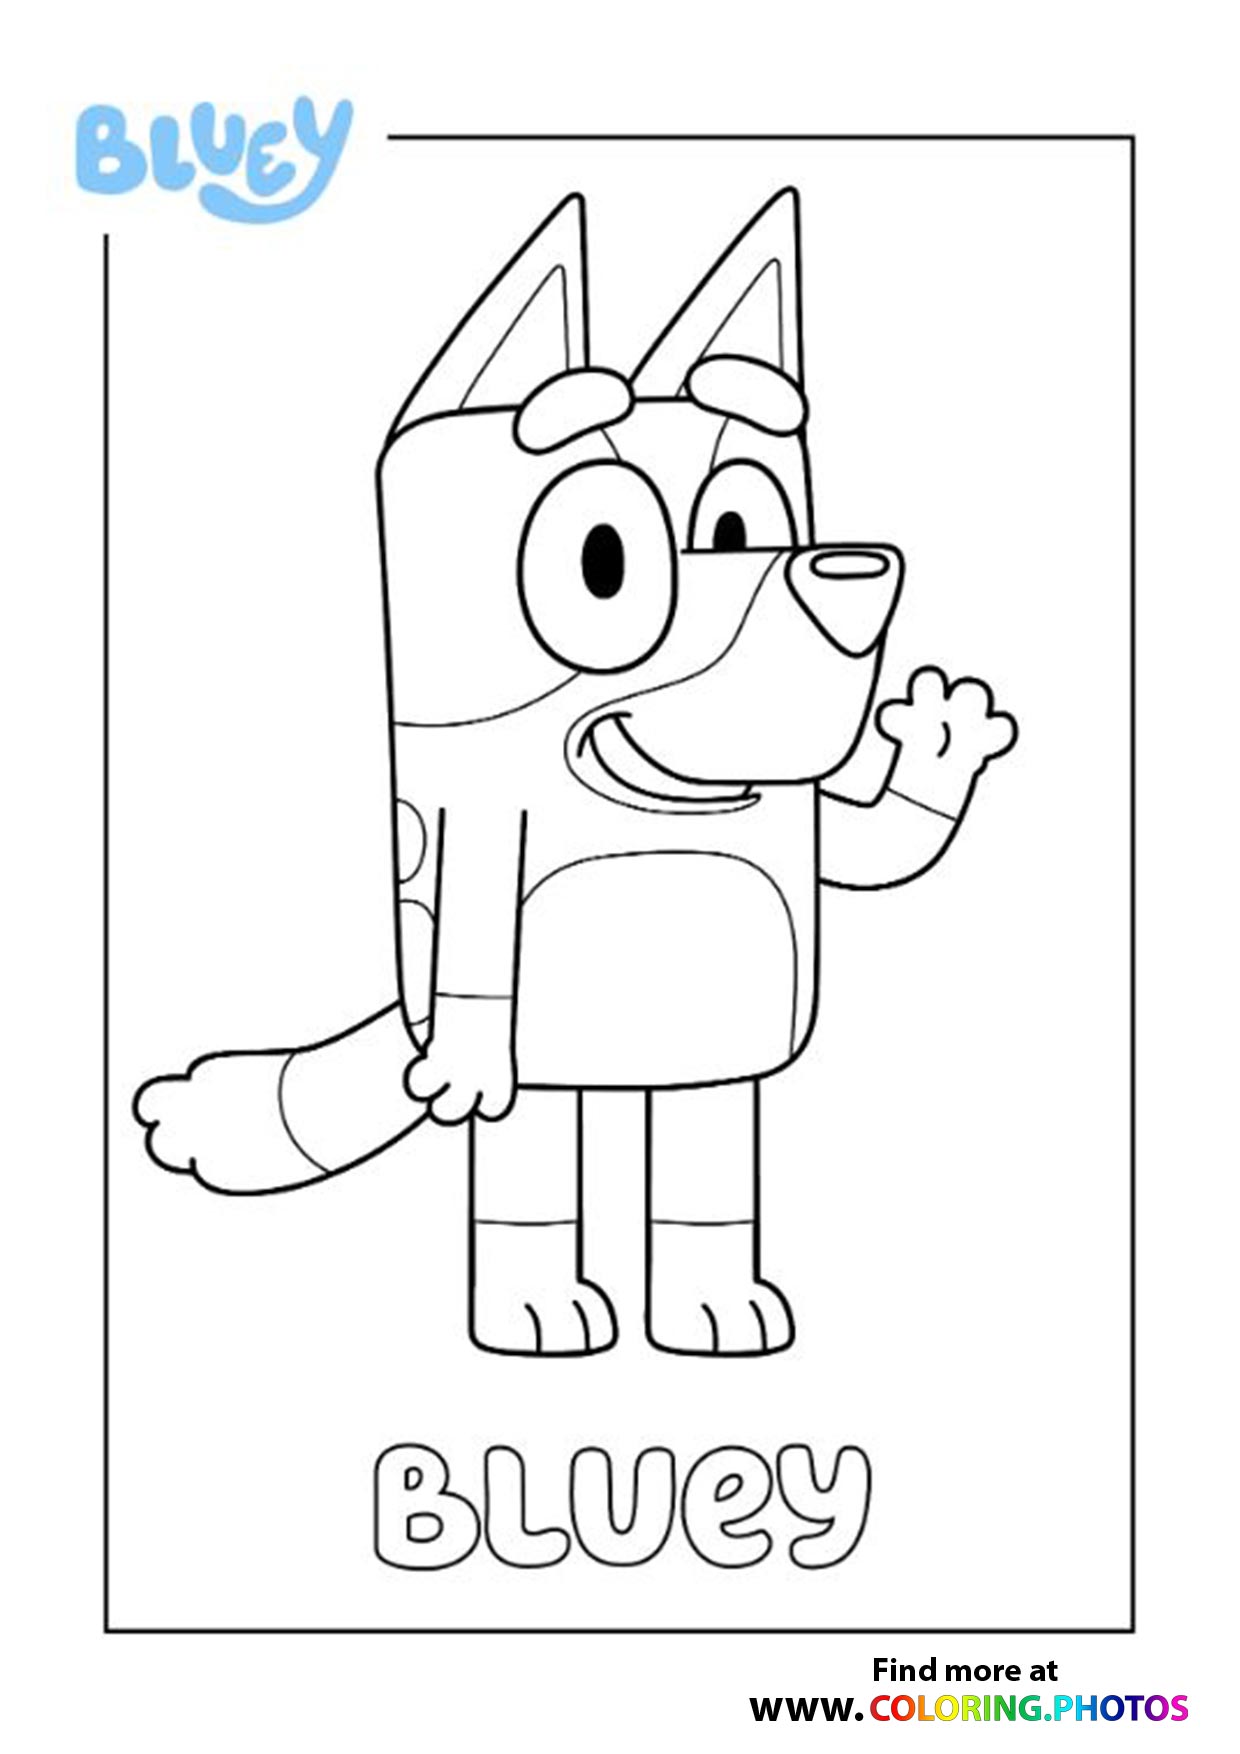 Bluey Coloring Pages for kids Free and easy print or